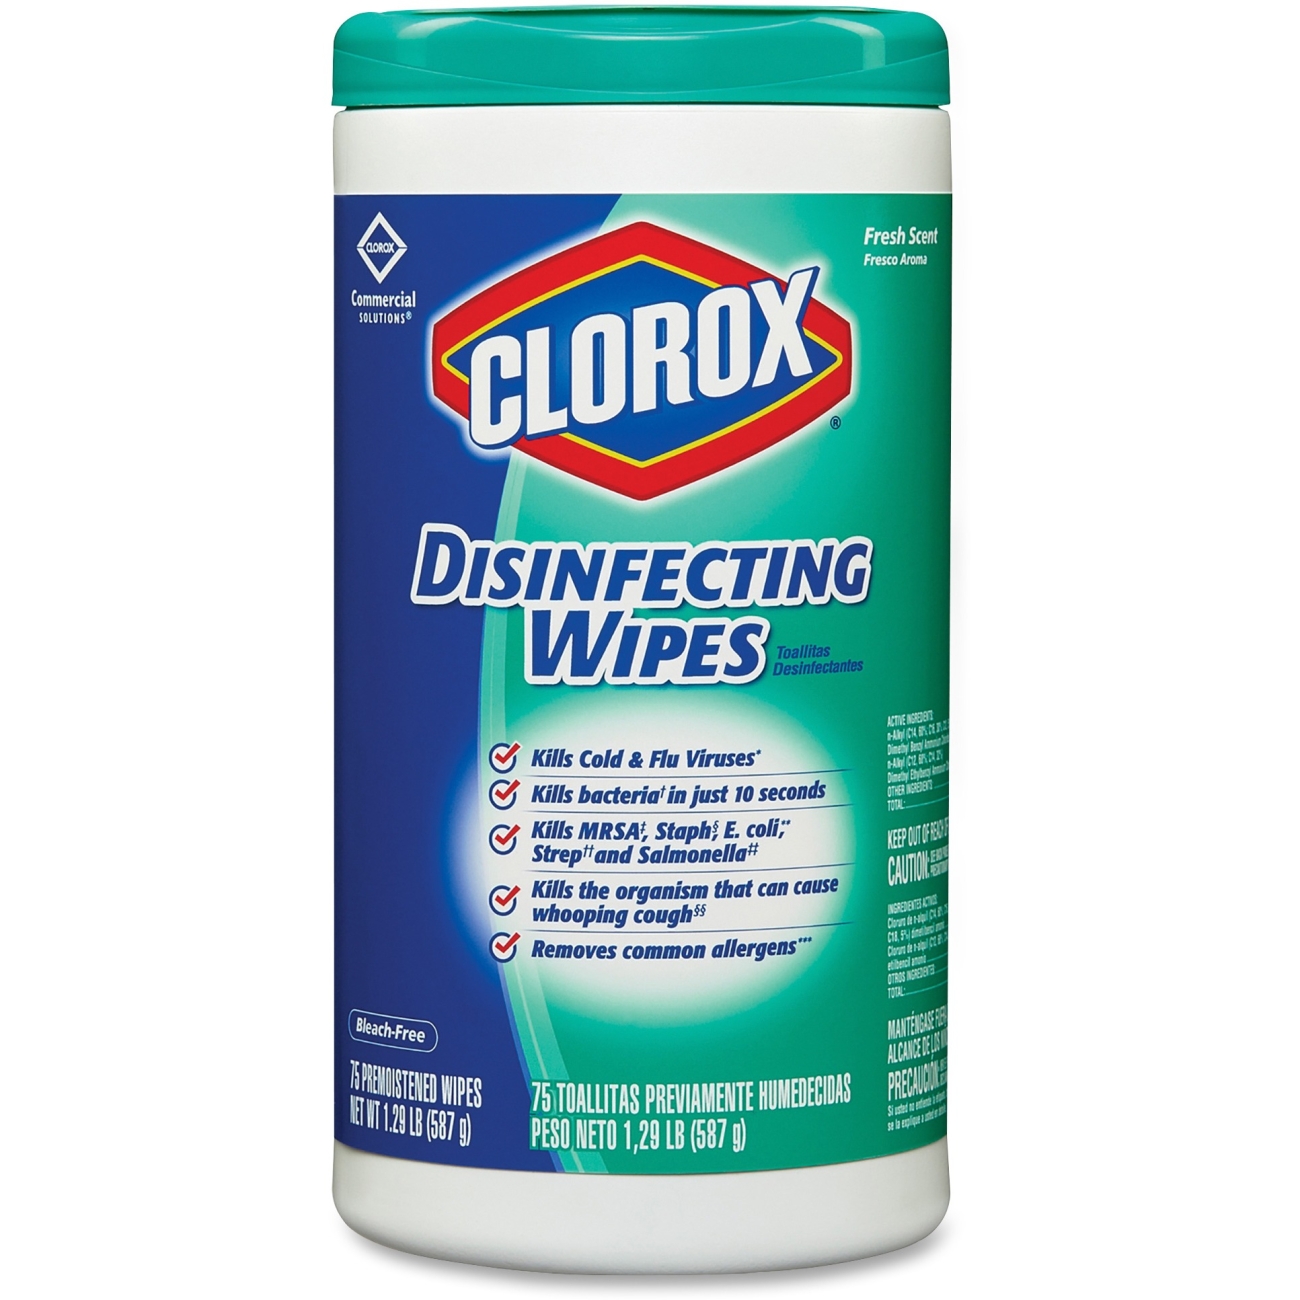 Clorox Disinfecting Wipes Fresh Scent 6 Canisters